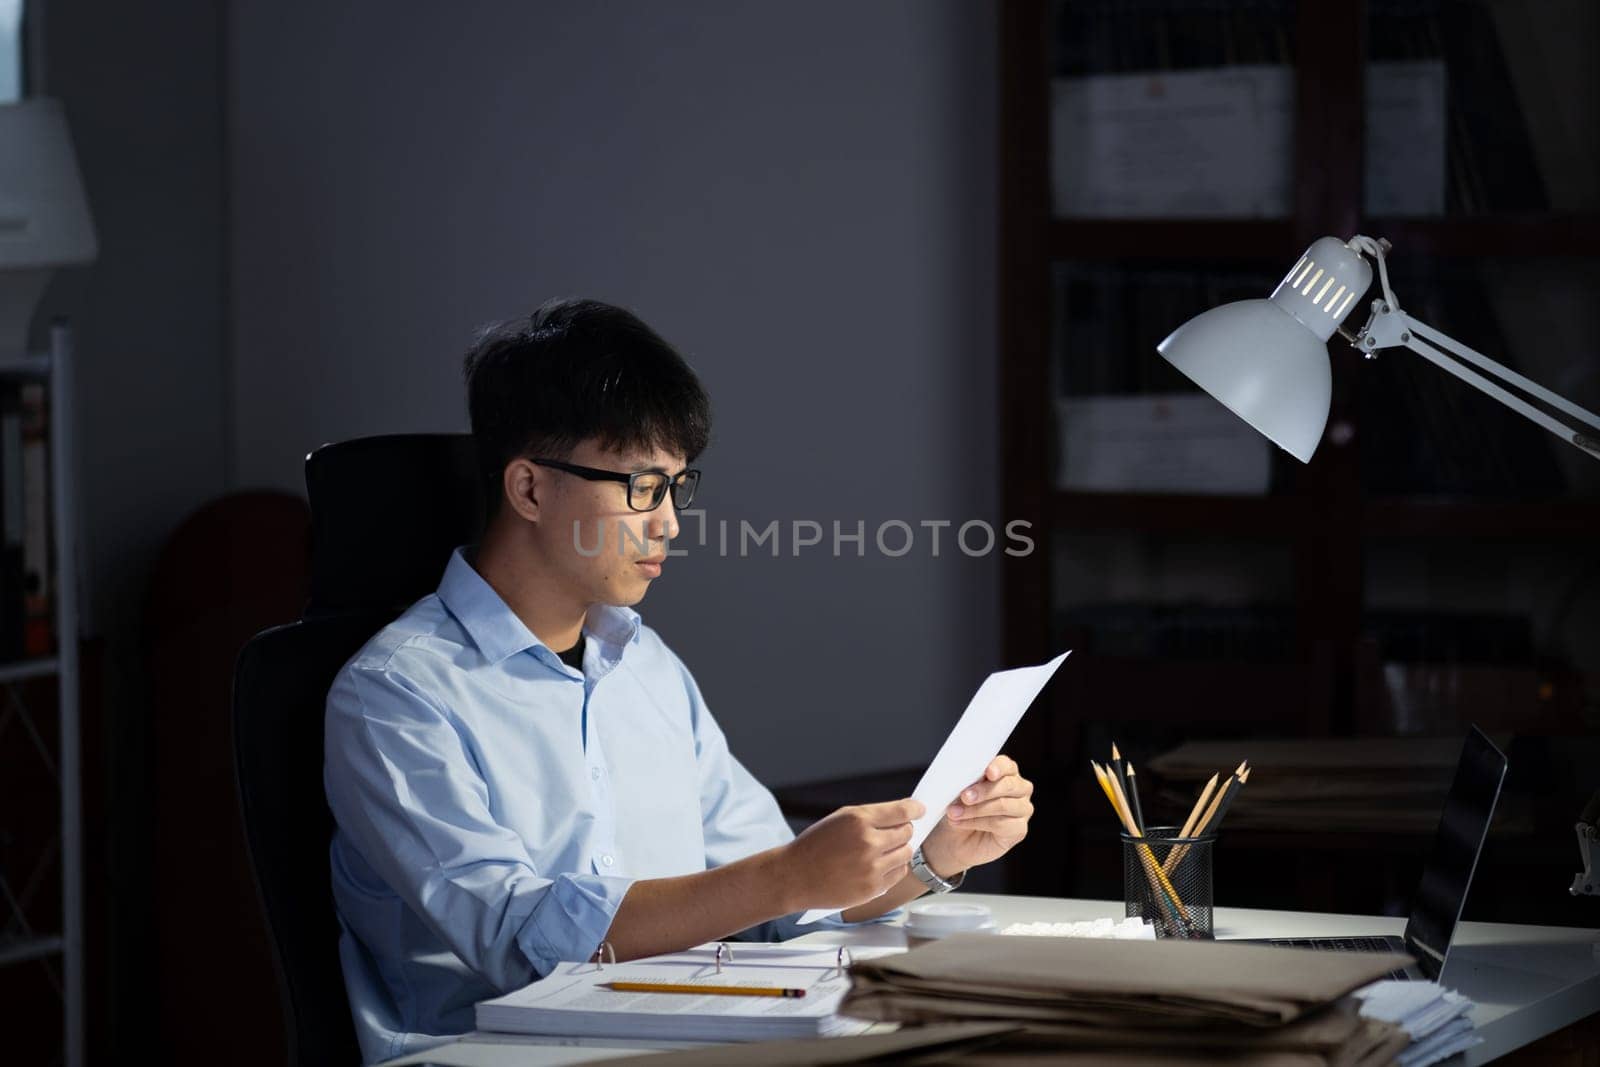 Businessman working hard overtime at night at the office. He felt tired and stressed from work.